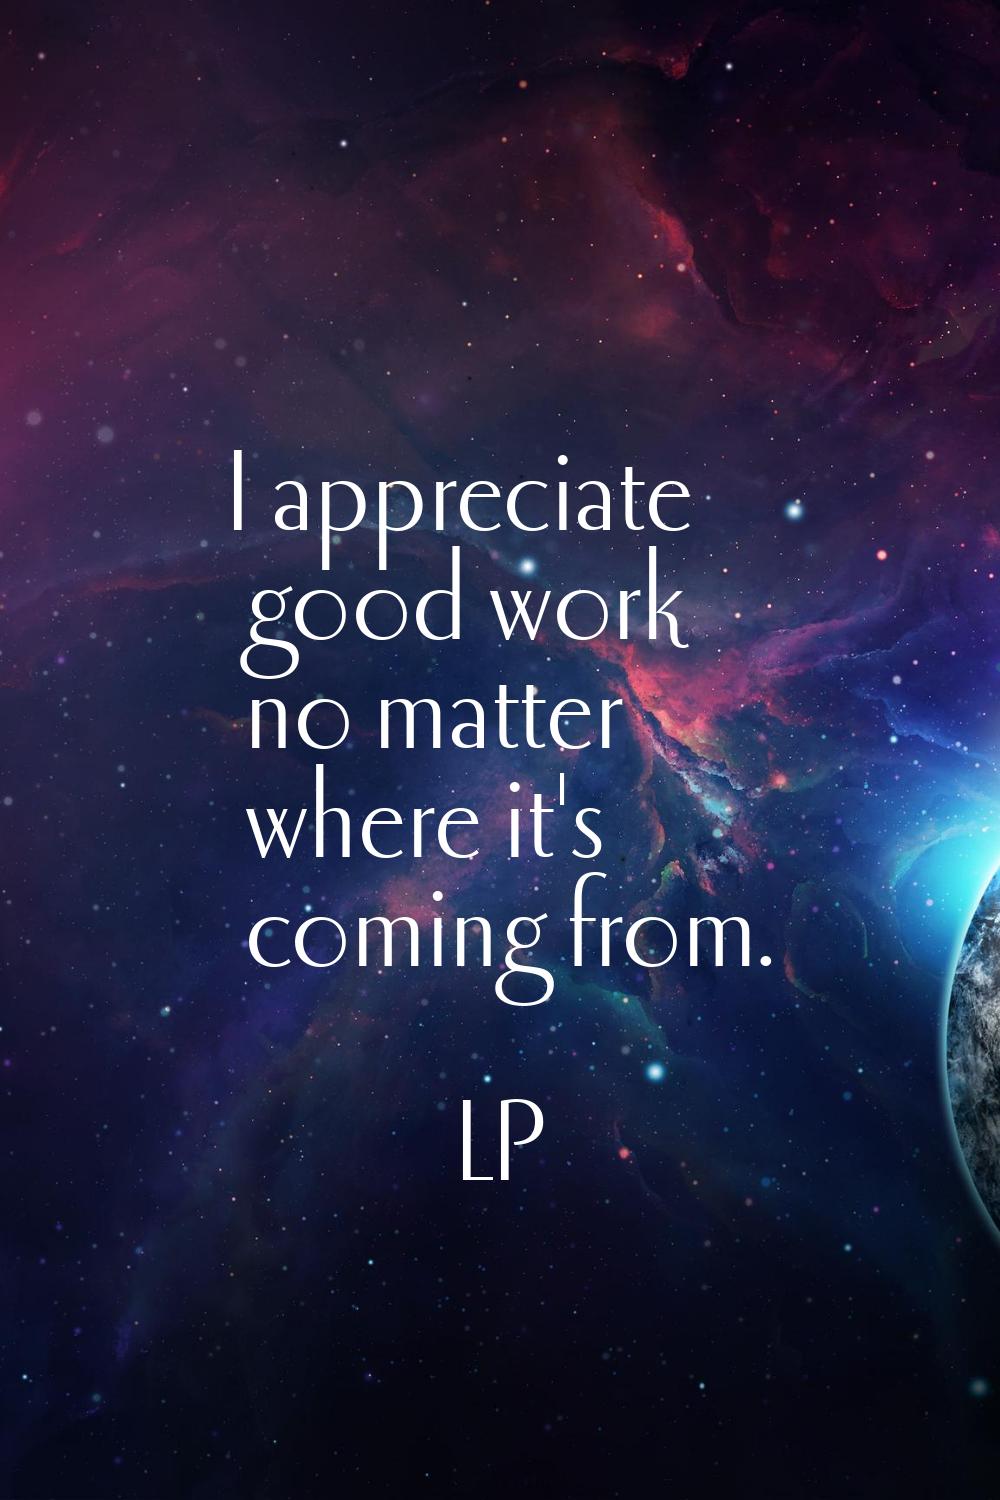 I appreciate good work no matter where it's coming from.